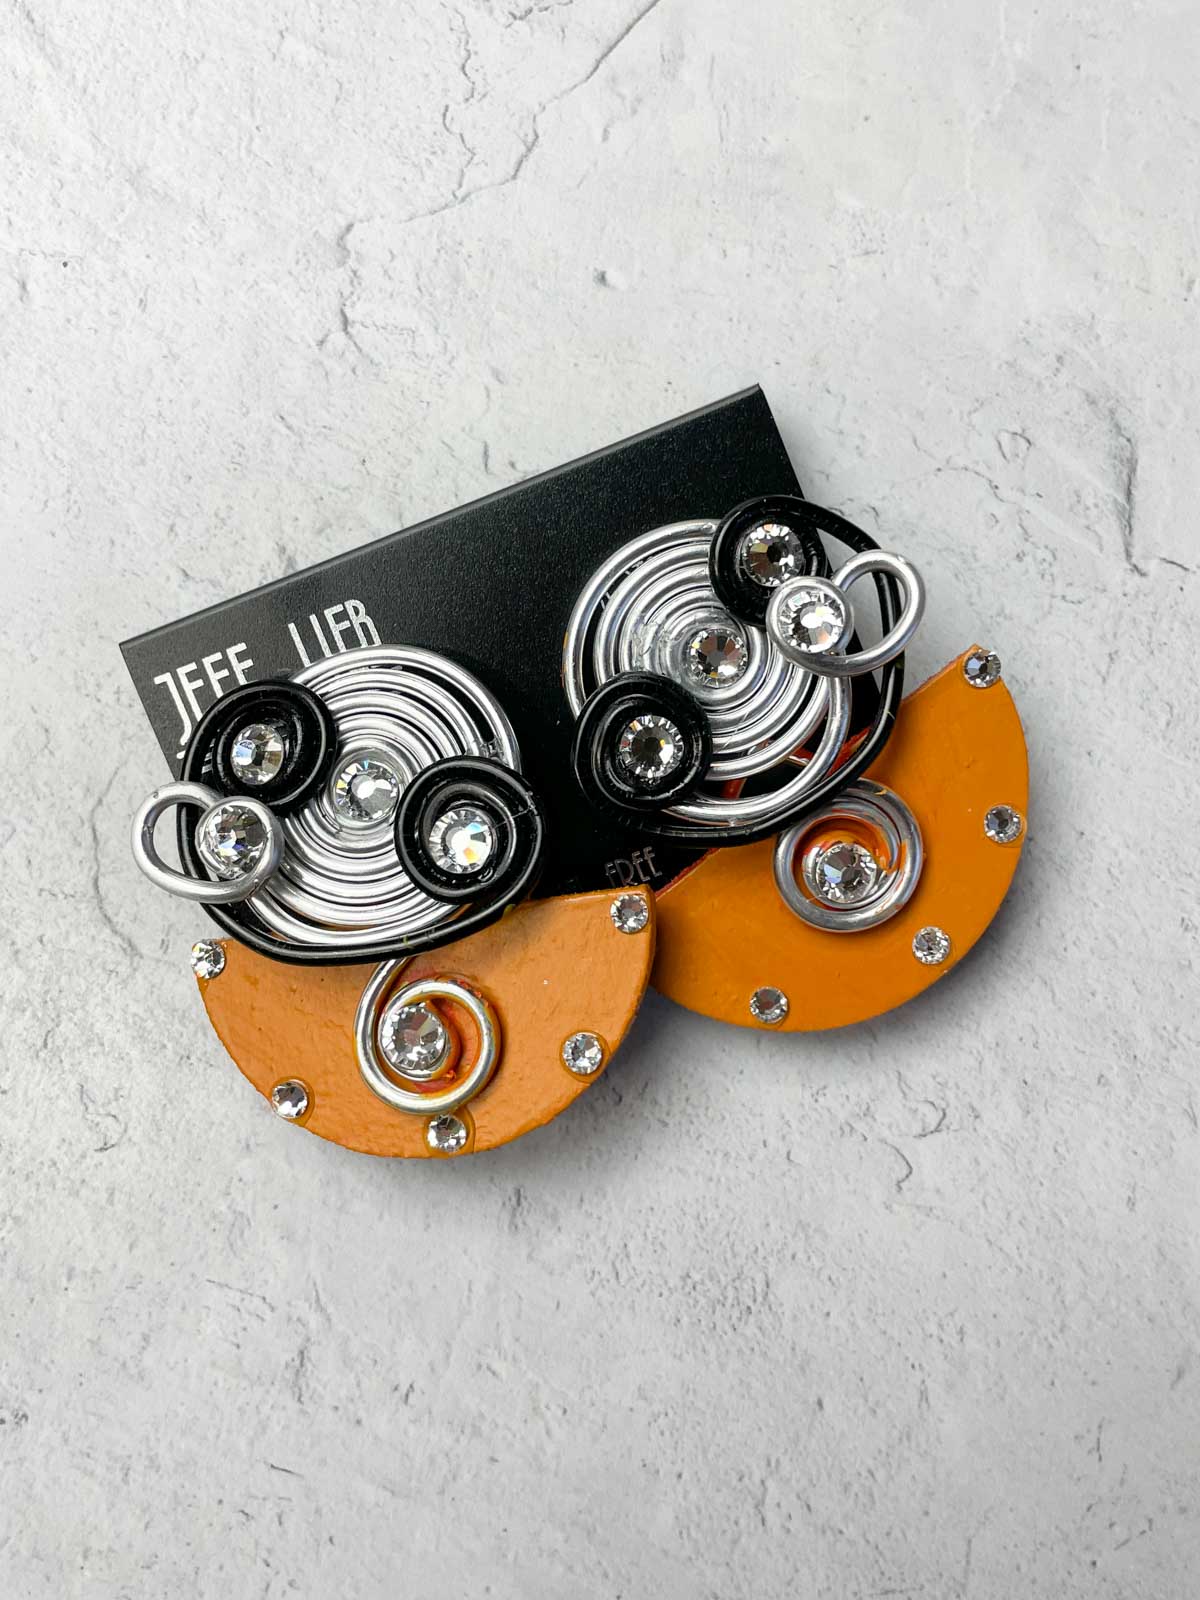 Jeff Lieb Total Design Jewelry Wire & Wood Shapes Clip On Earrings, Orange/Silver/Black - Statement Boutique